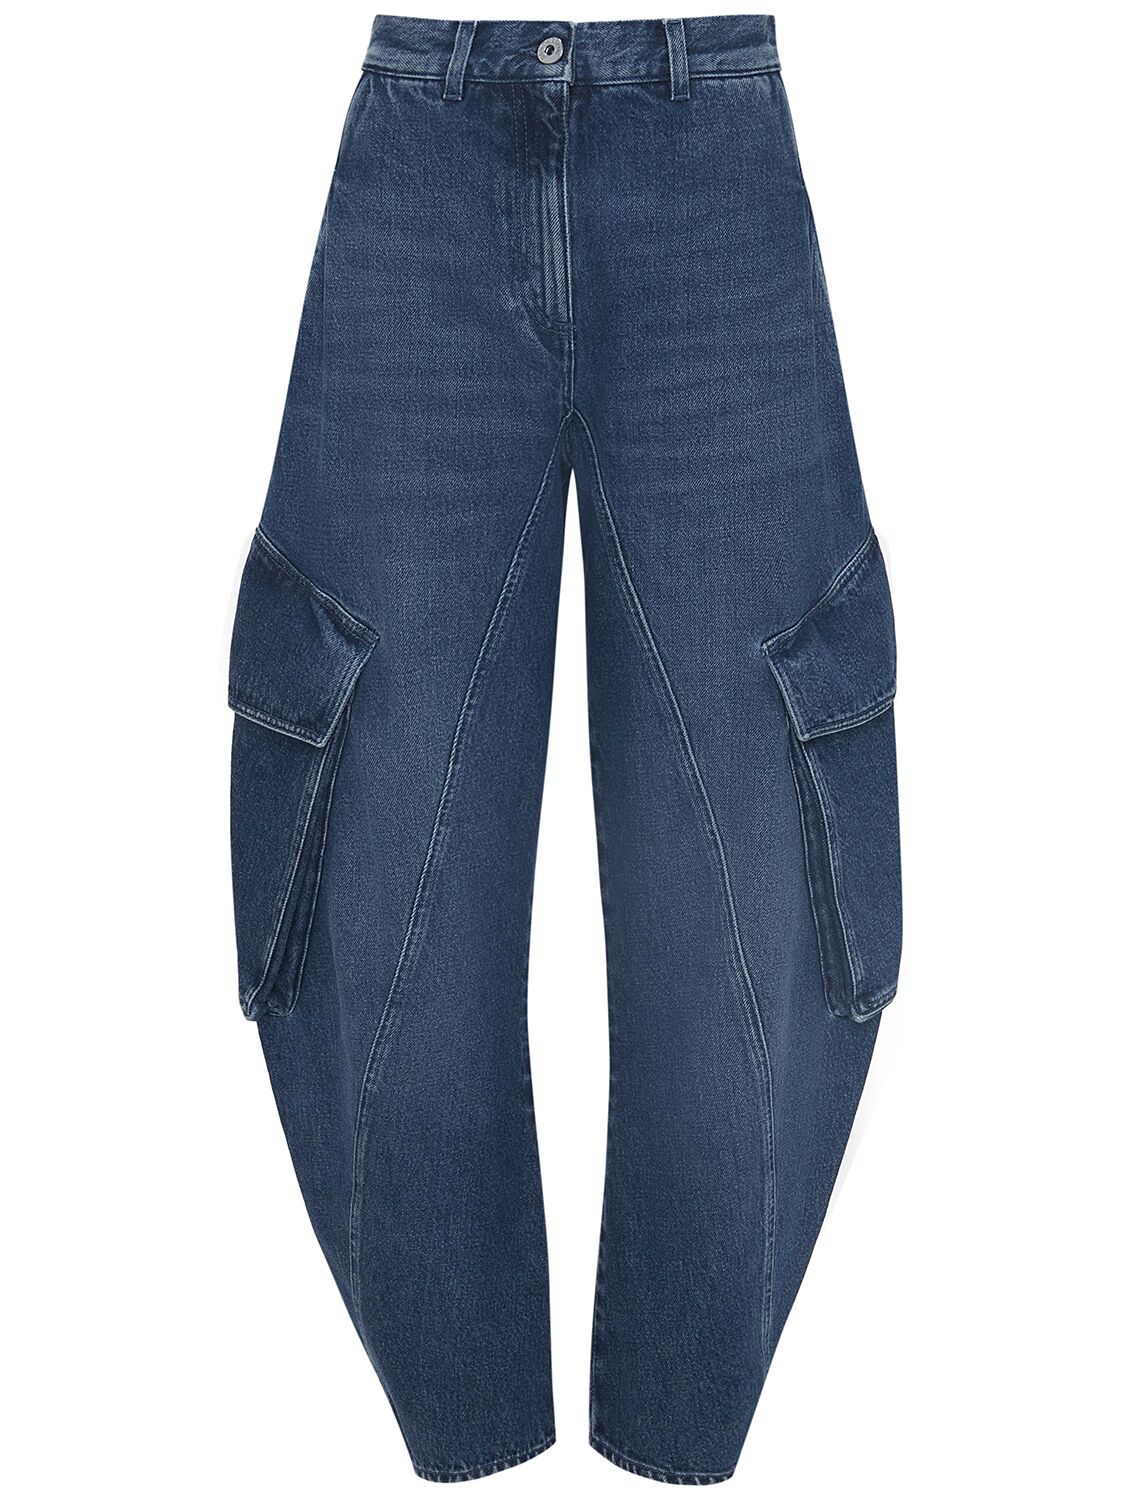 Image of Twisted Cargo Jeans